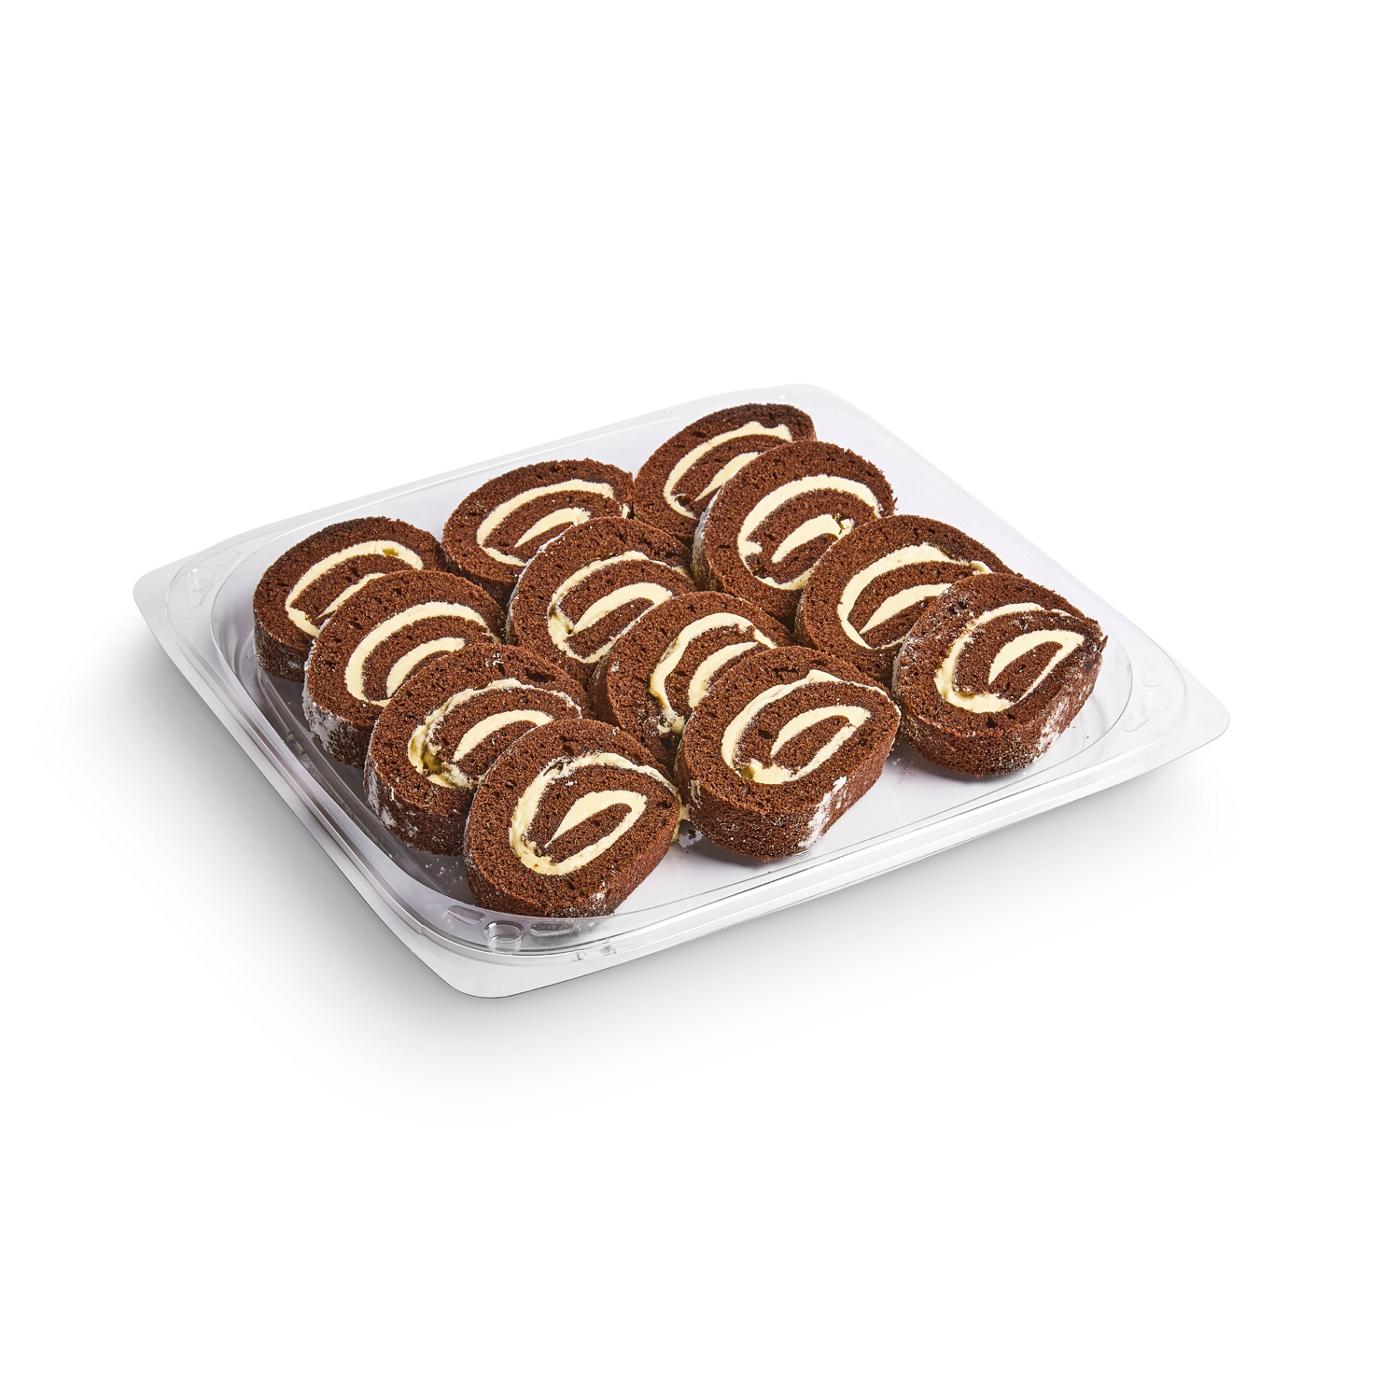 H-E-B Bakery Party Tray - Chocolate Cake Rolls; image 3 of 3